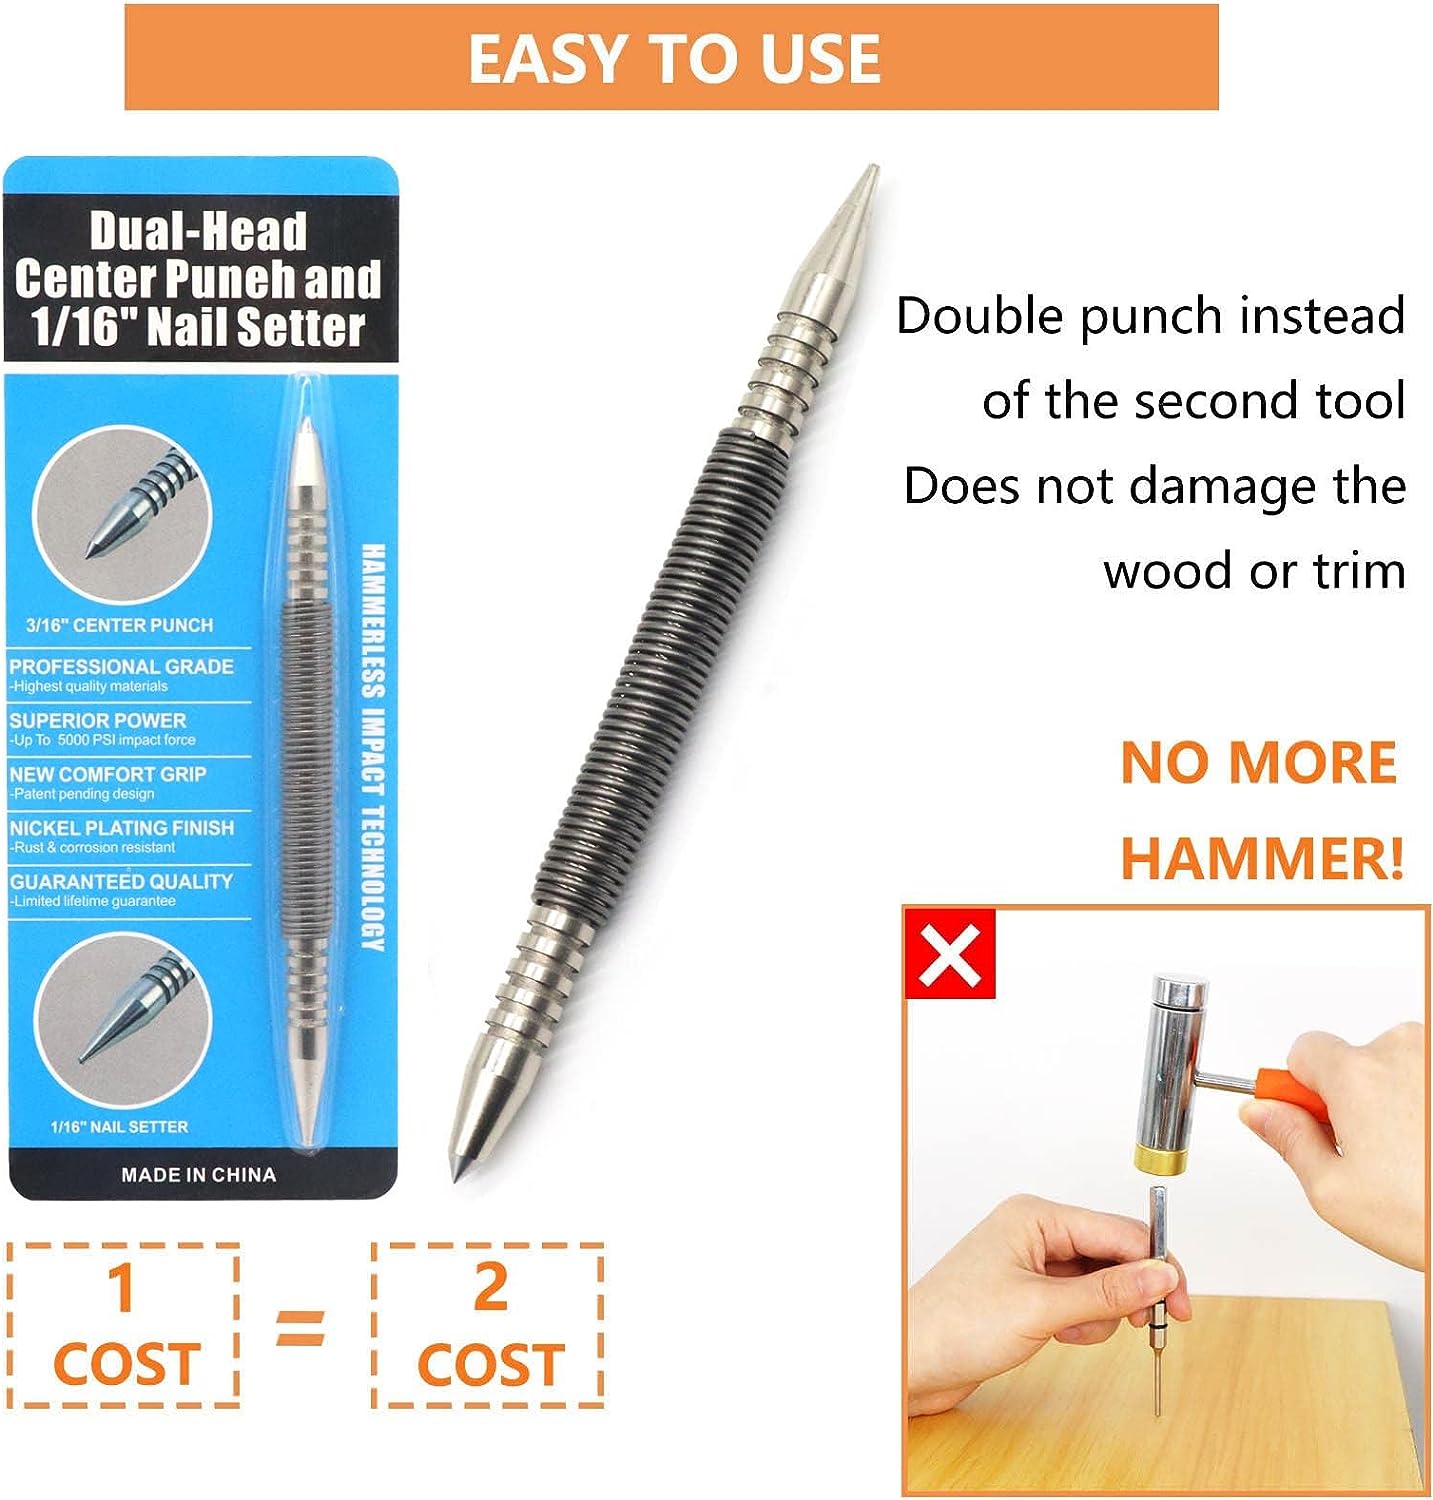 Hammerless Nail Center Holes Punch Spring Pin Removal Tool